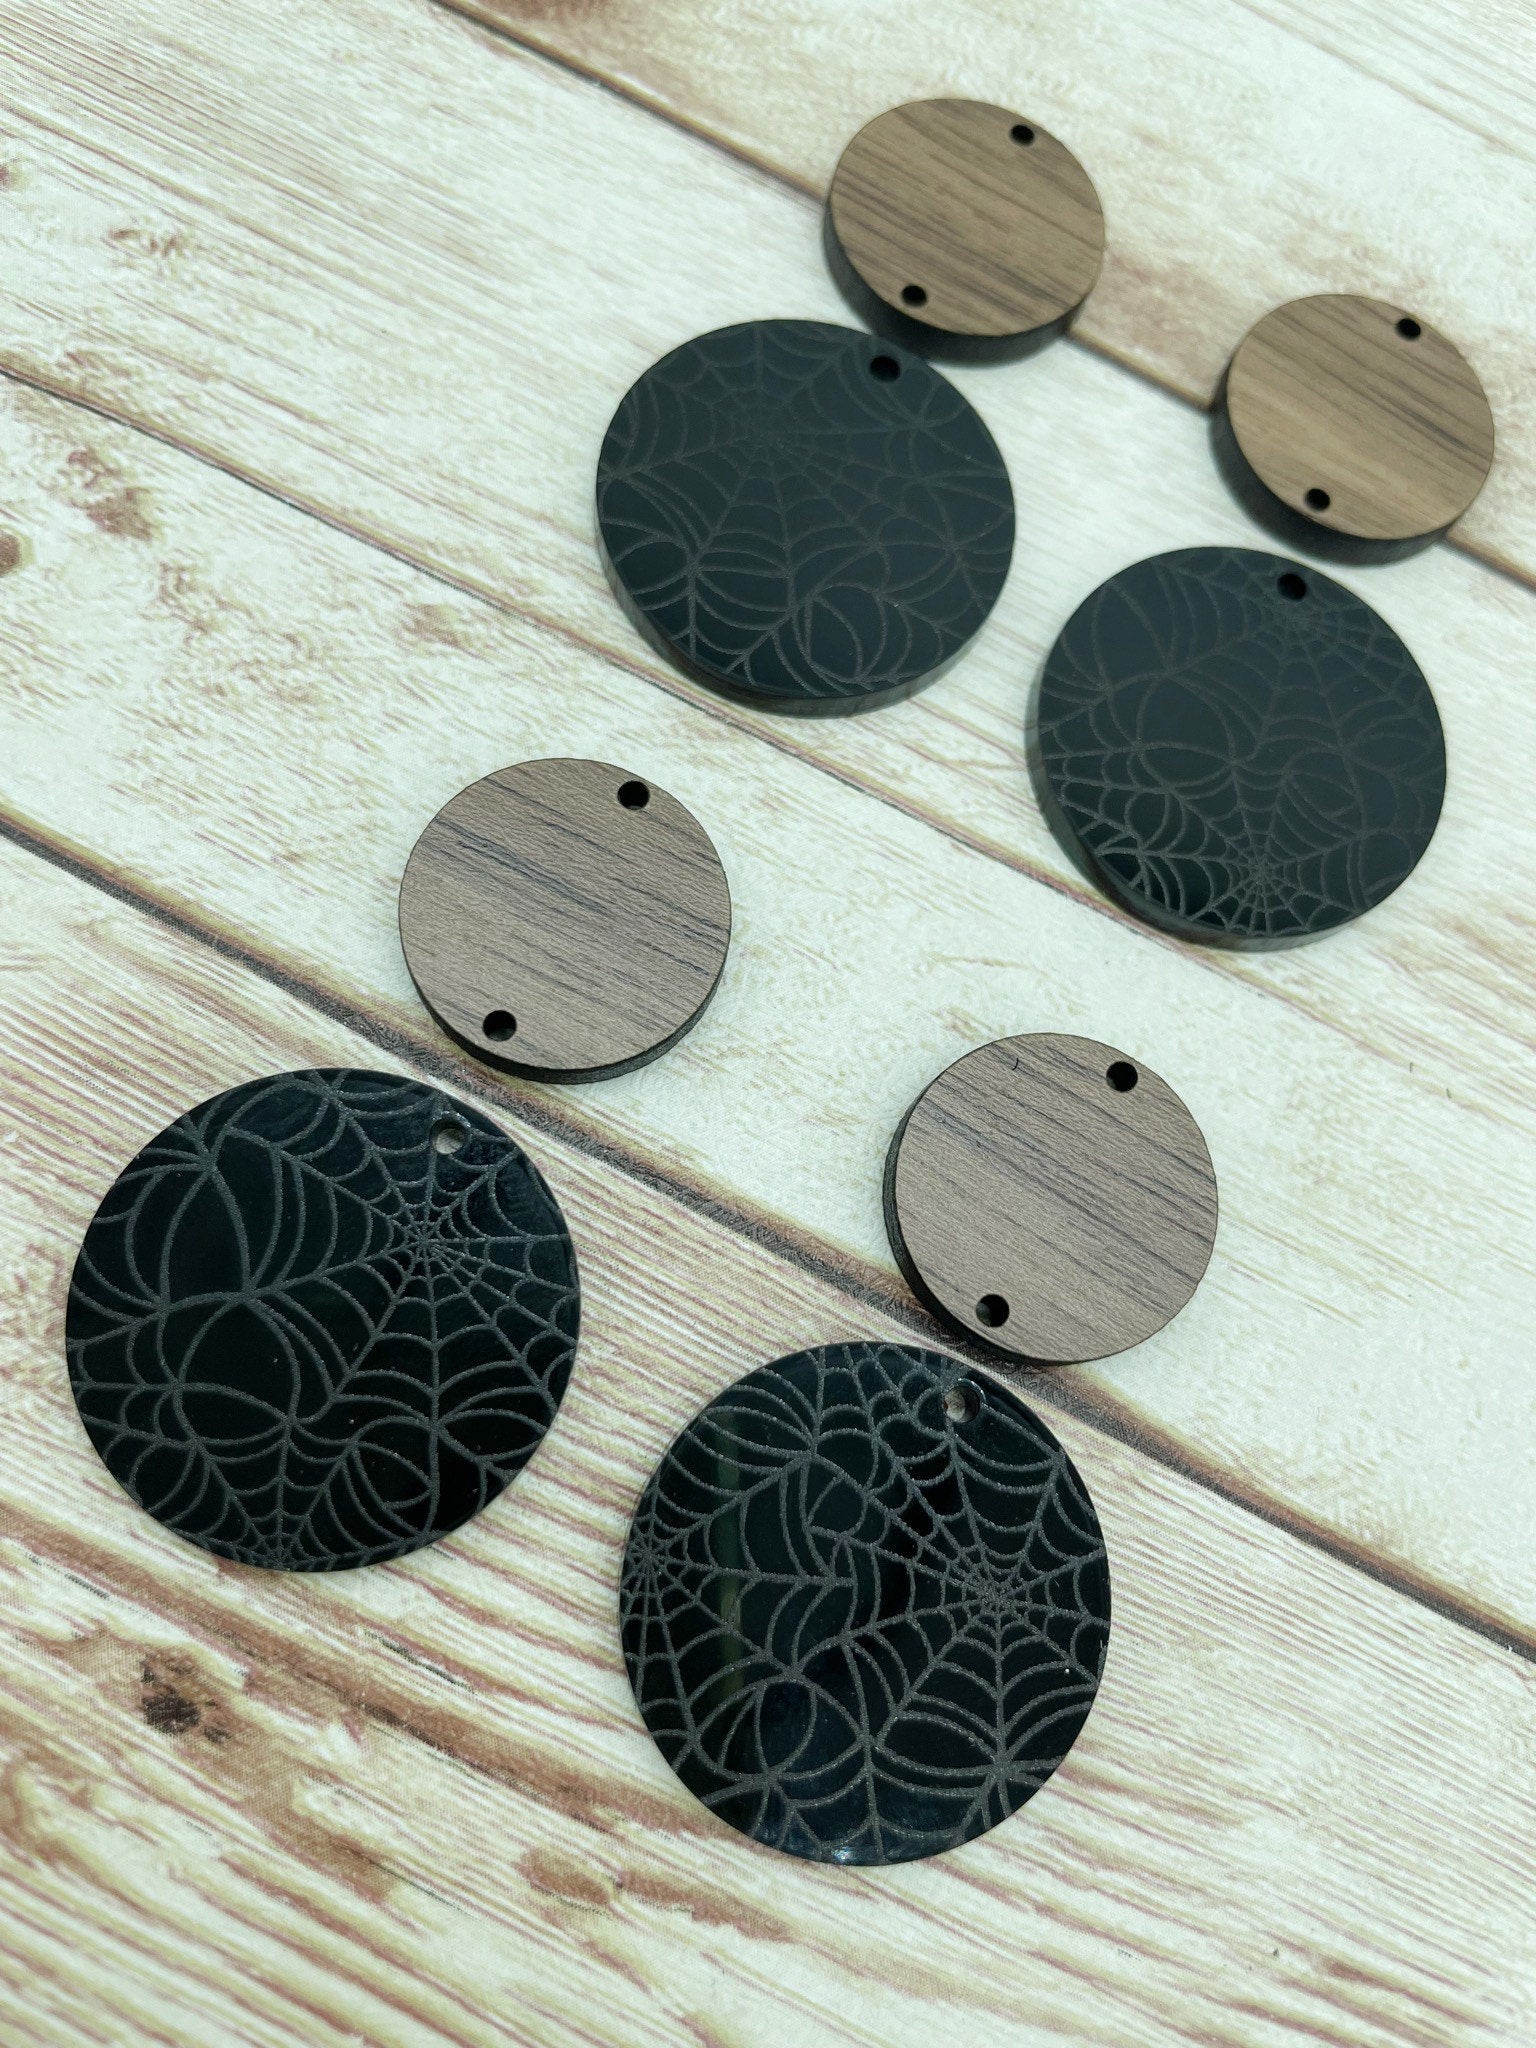 Patterned Acrylic and Wood Circle Set Halloween Spider Web Print Earring Blanks, DIY Jewelry Making